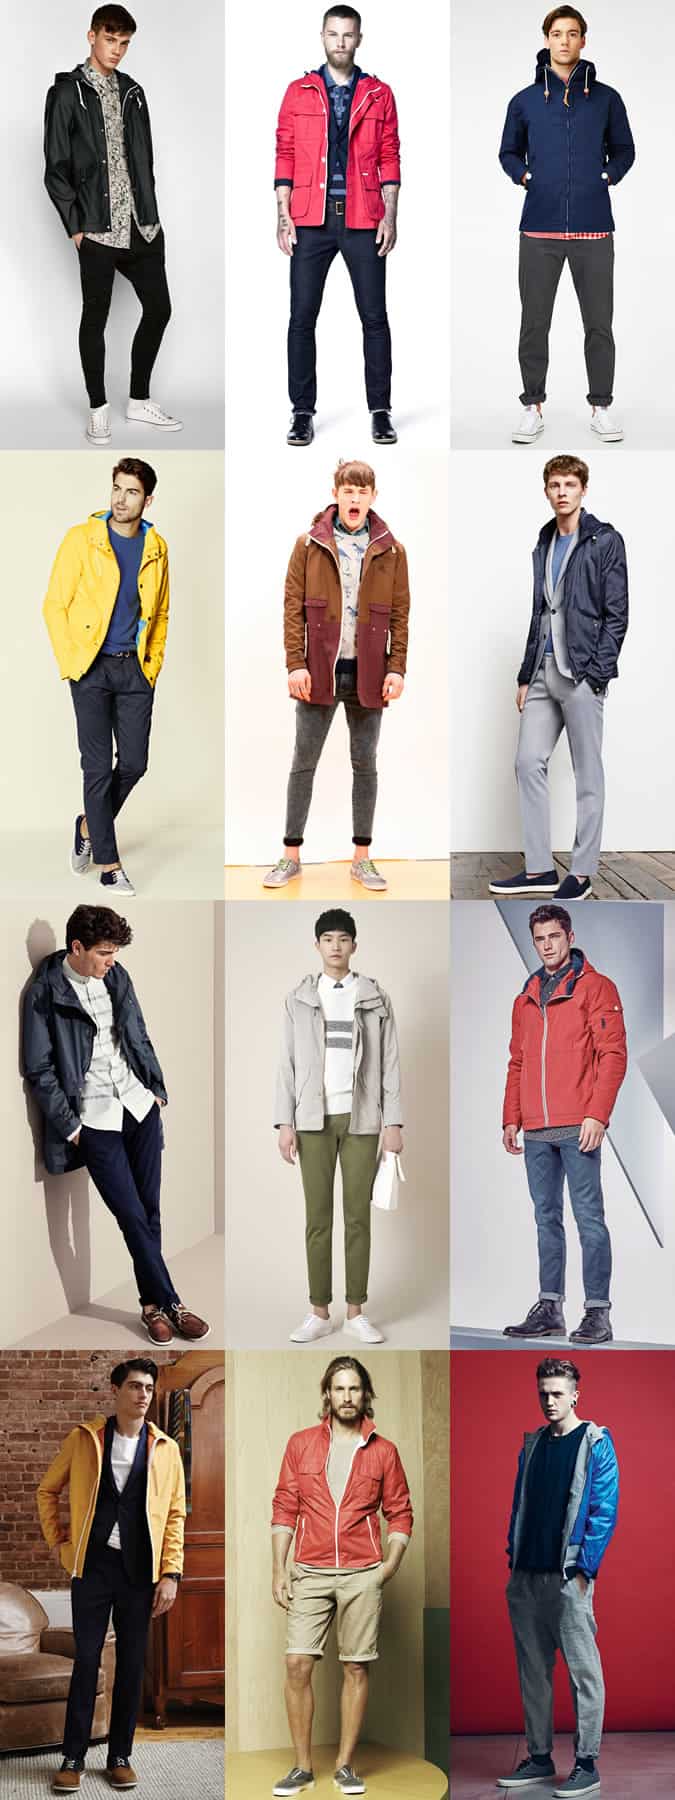 Men's Technical Jackets & Coats Outfit Inspiration Lookbook